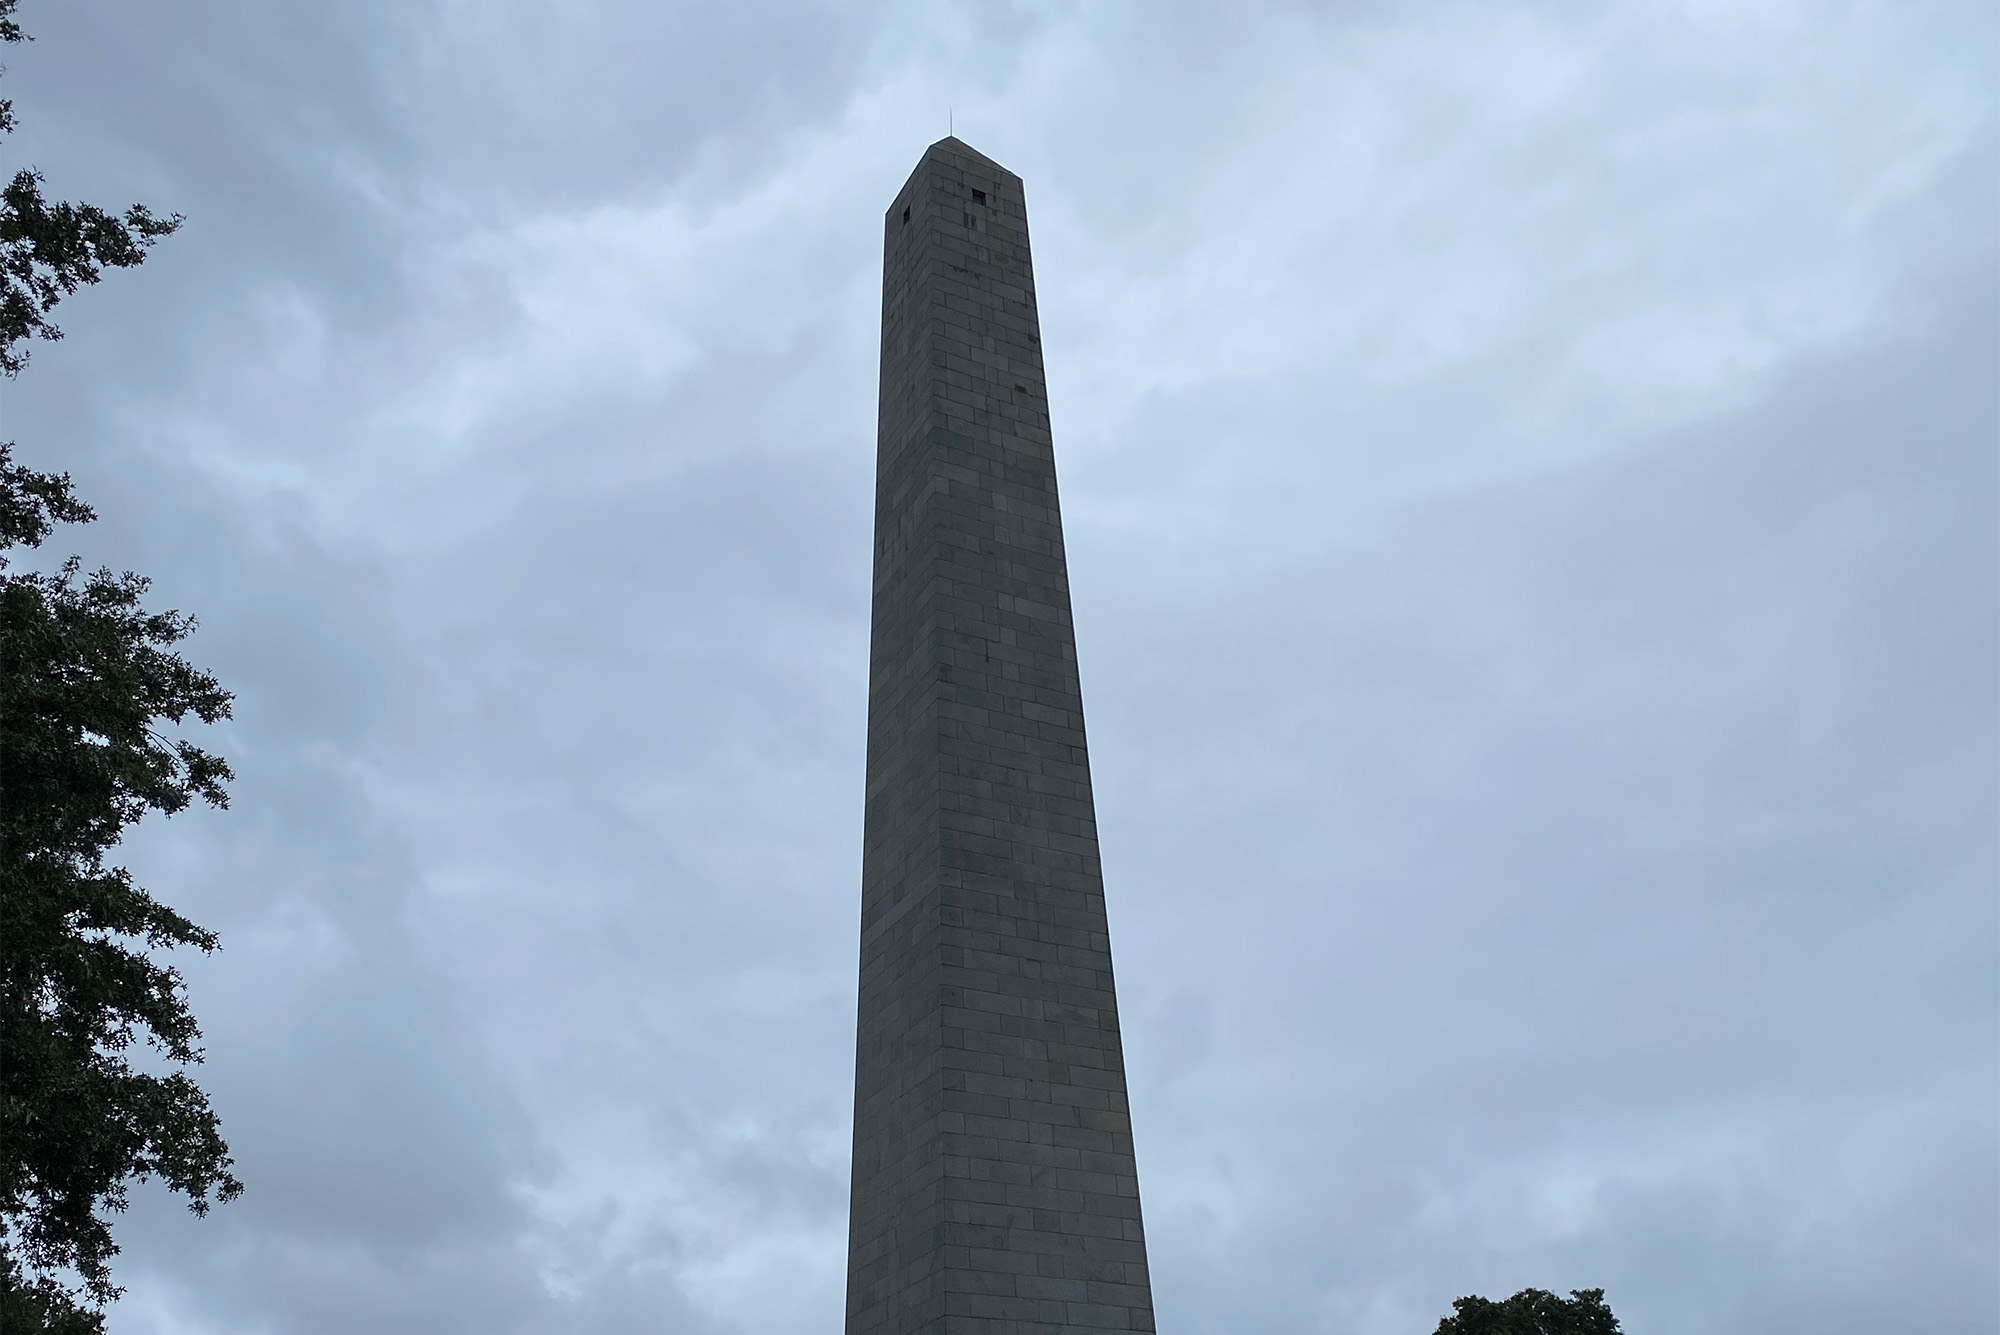 Bunker Hill Monument stands tall on a cloudy day in Charlestown, MA